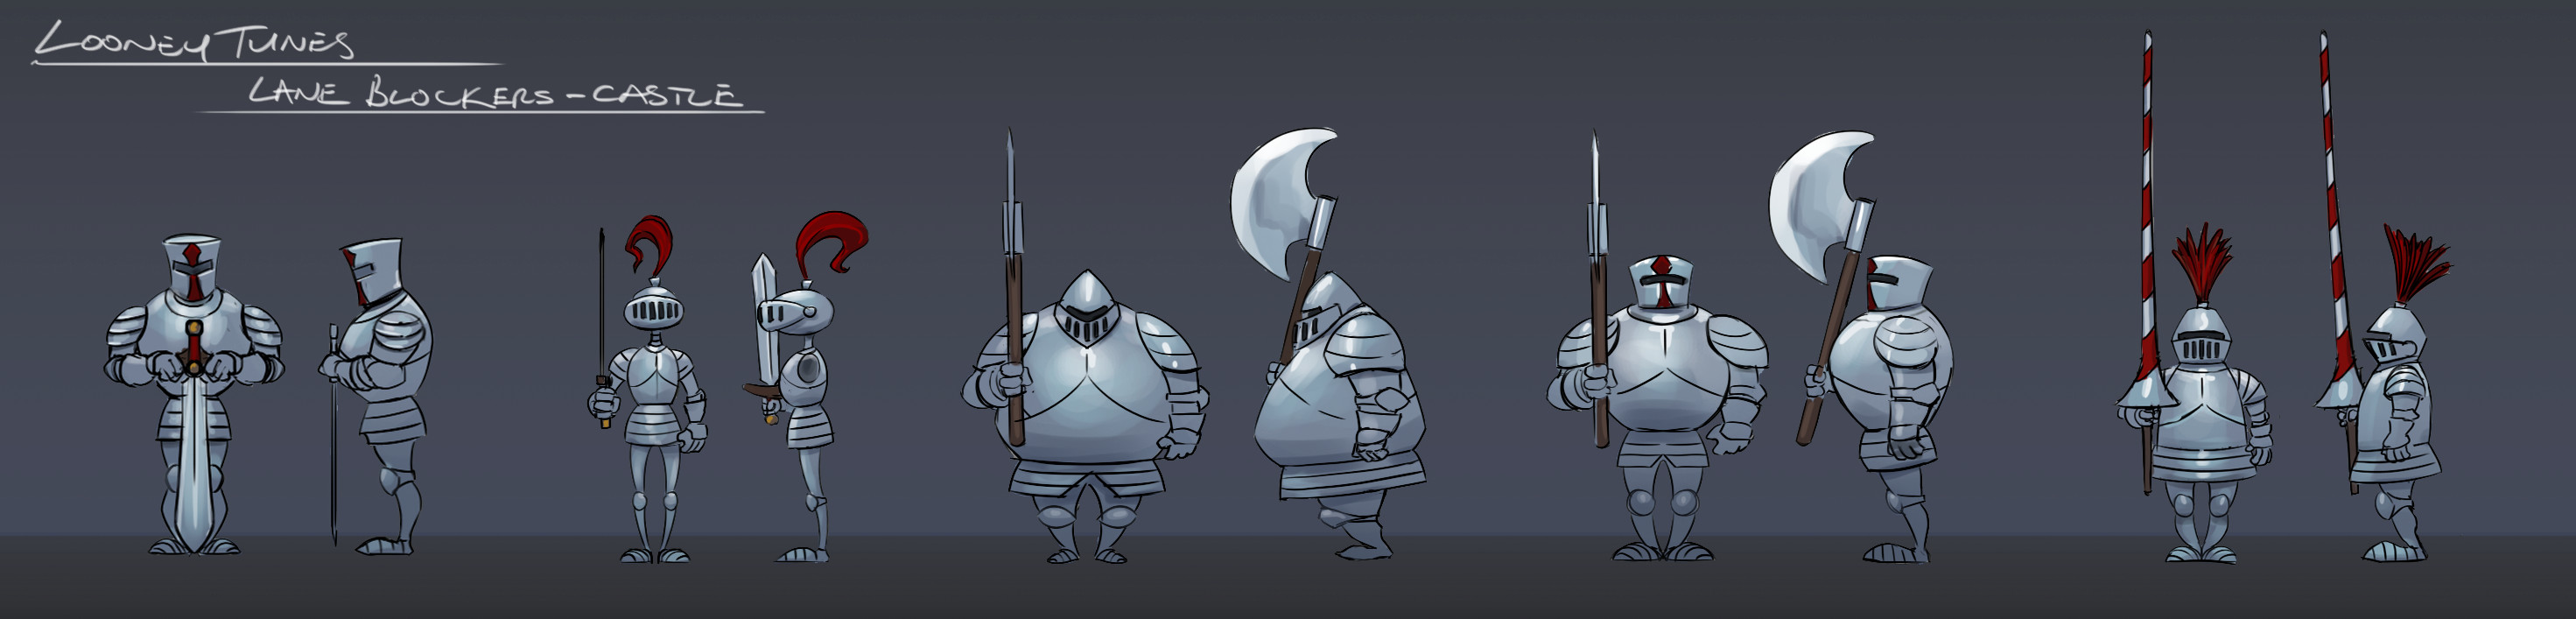 'Looney Tuney' knights for the scary castle level